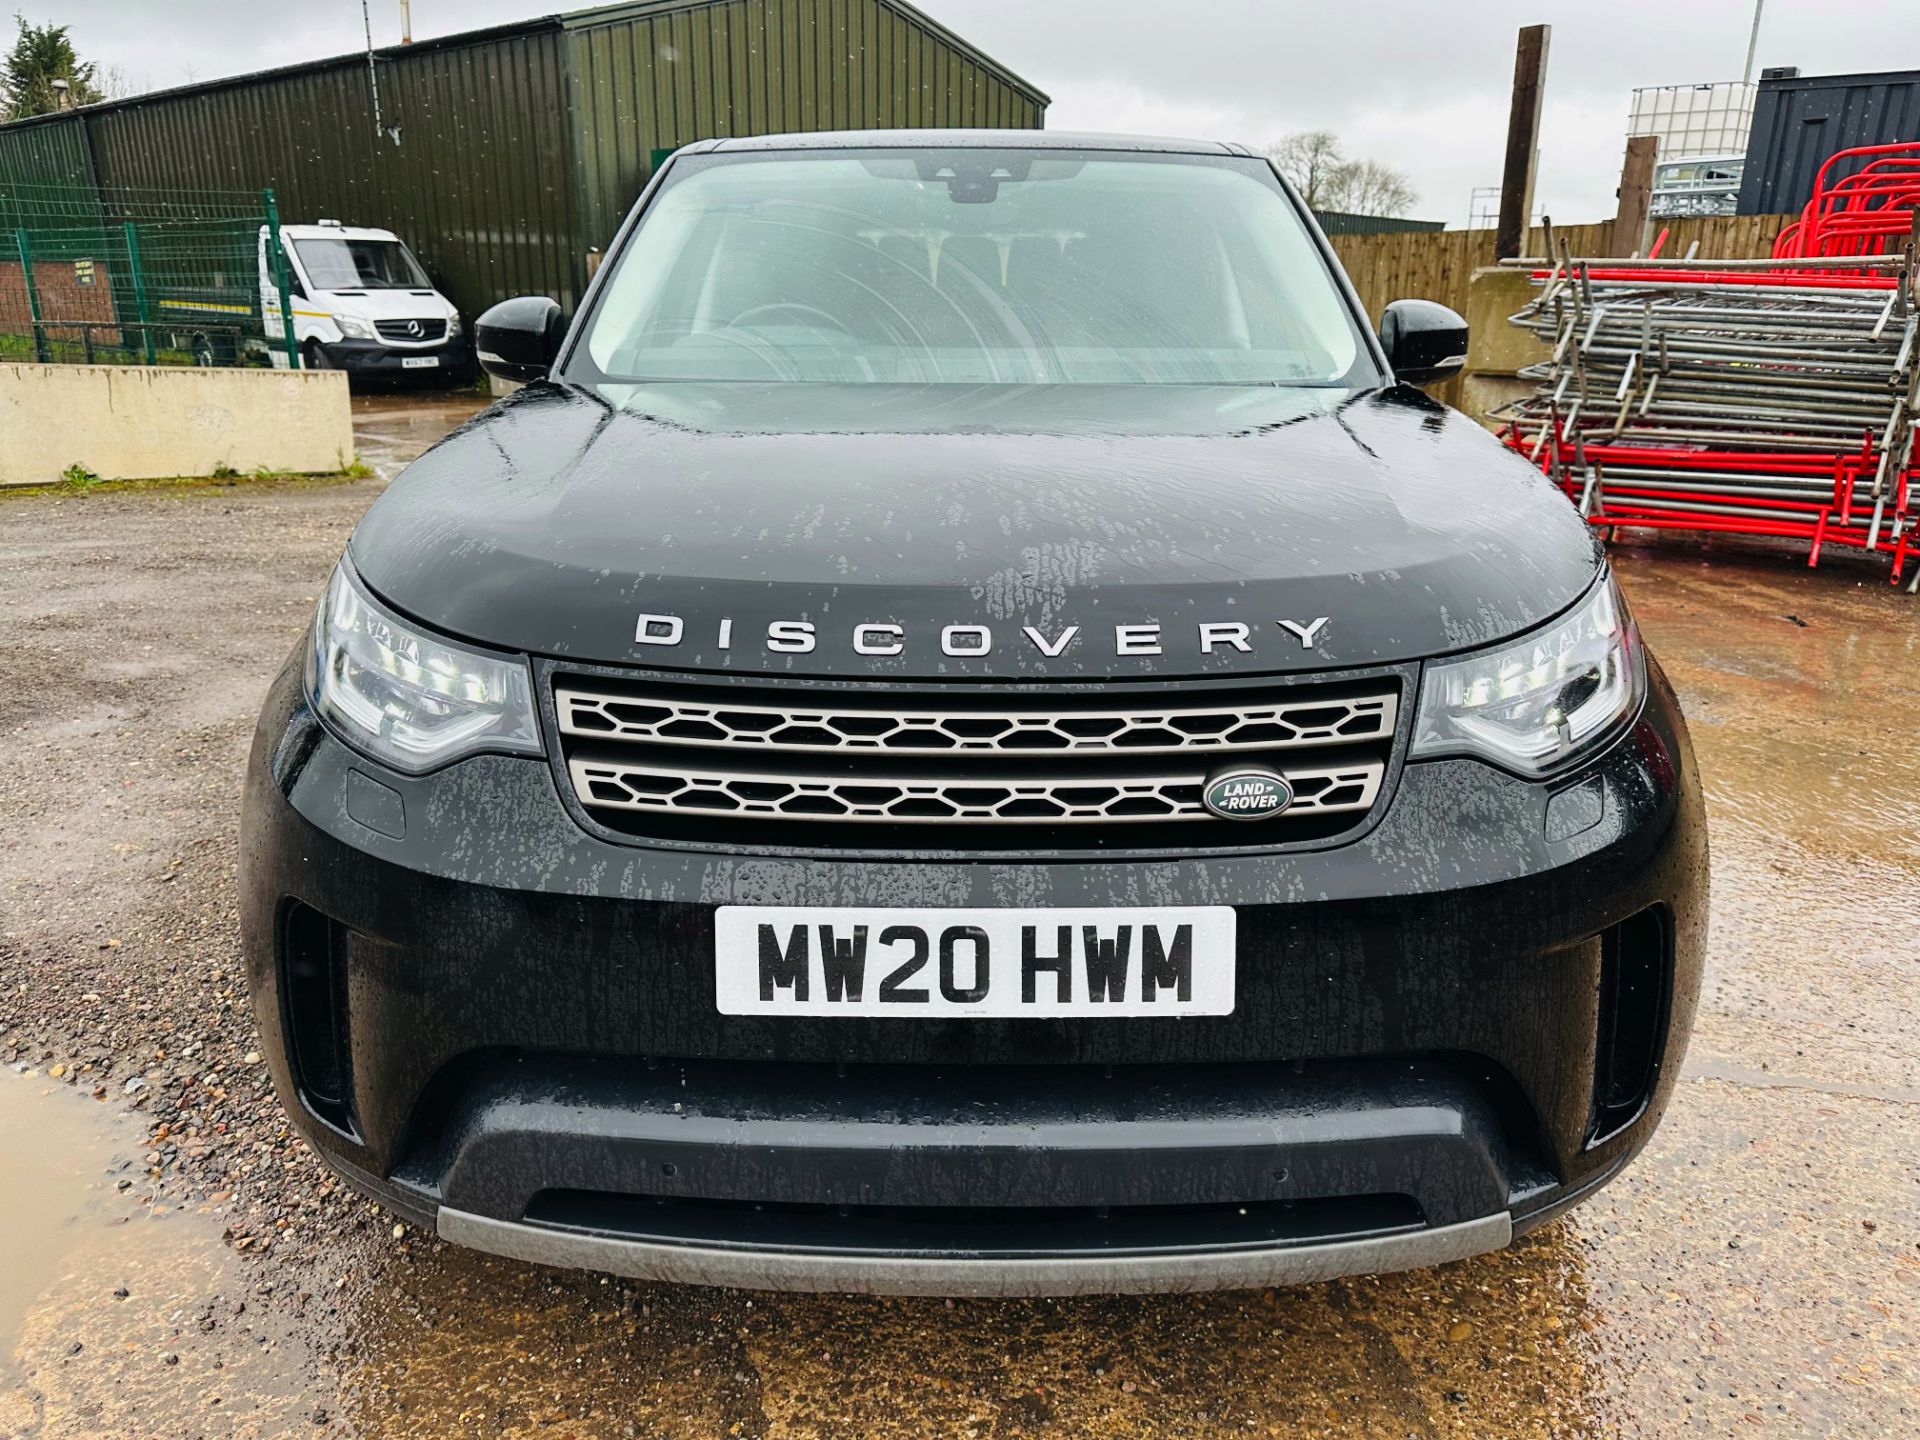 (Reserve Met) Land Rover Discovery SE Automatic (Black Edition) - 2020 Model - Only 57k Miles! - Image 3 of 40